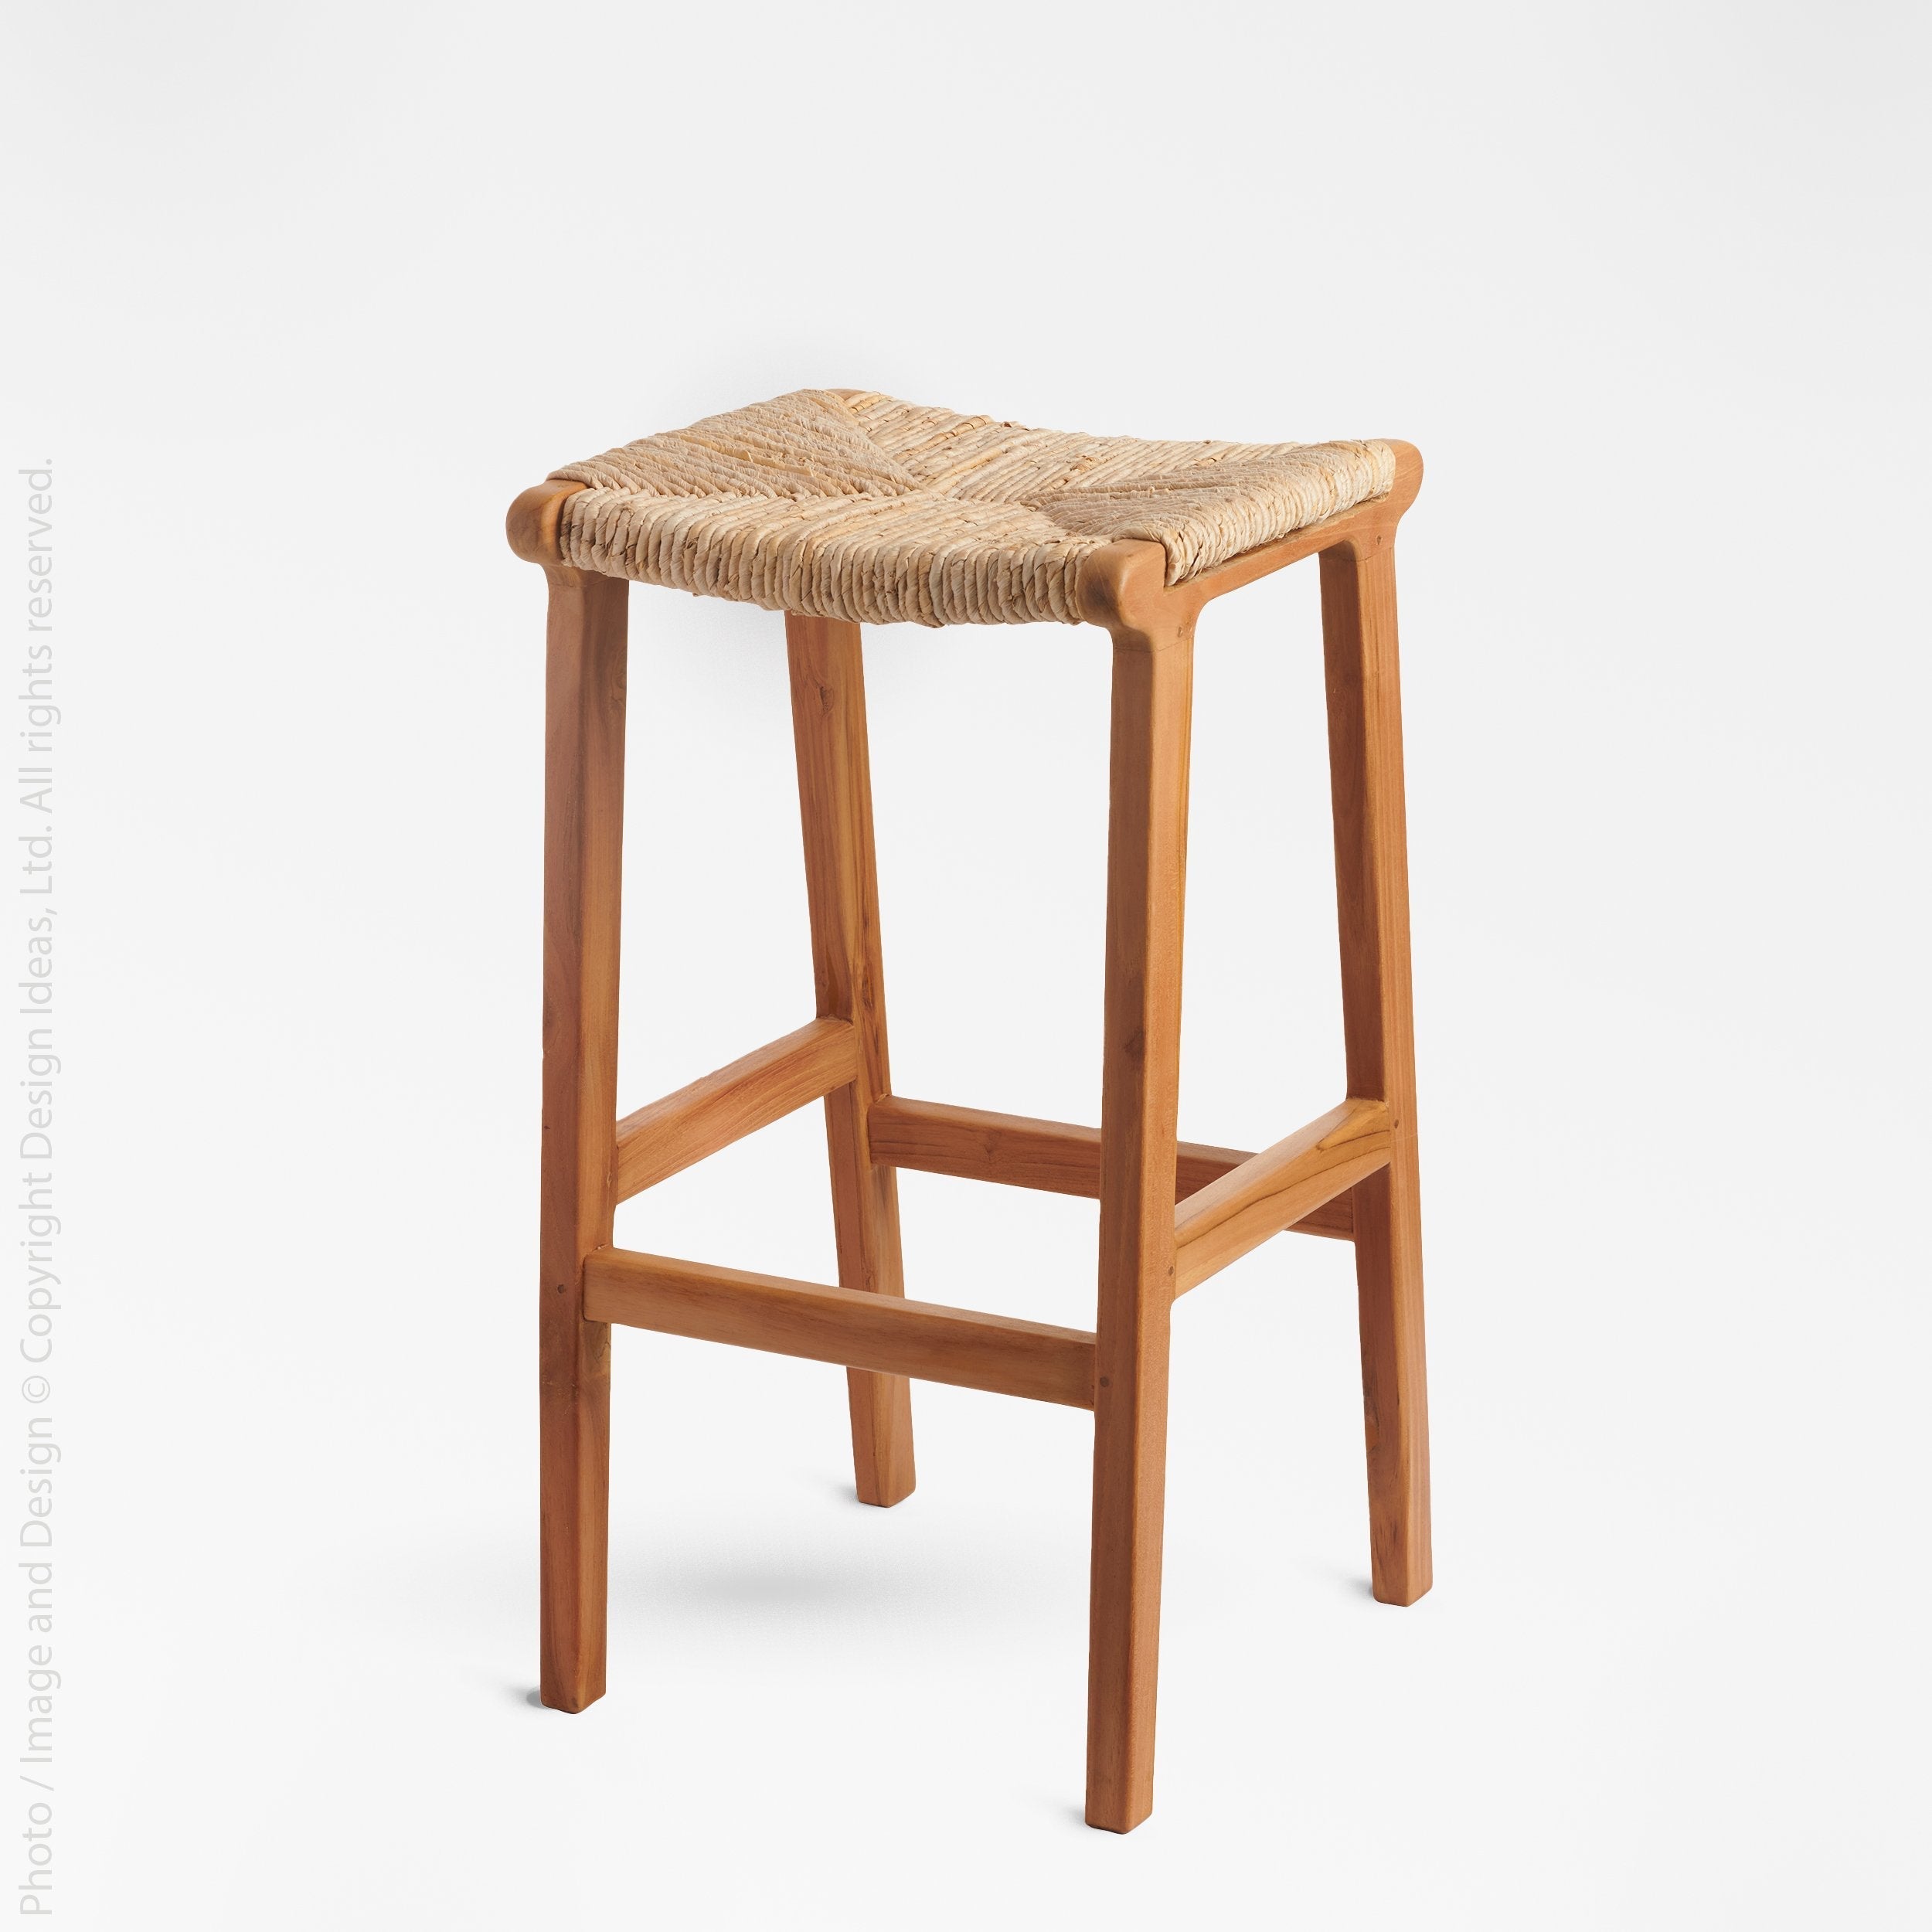 Visby Banana Tree Bark Bar Stool - Sand Color | Image 1 | From the Visby Collection | Skillfully assembled with natural banana tree bark for long lasting use | Available in natural color | texxture home